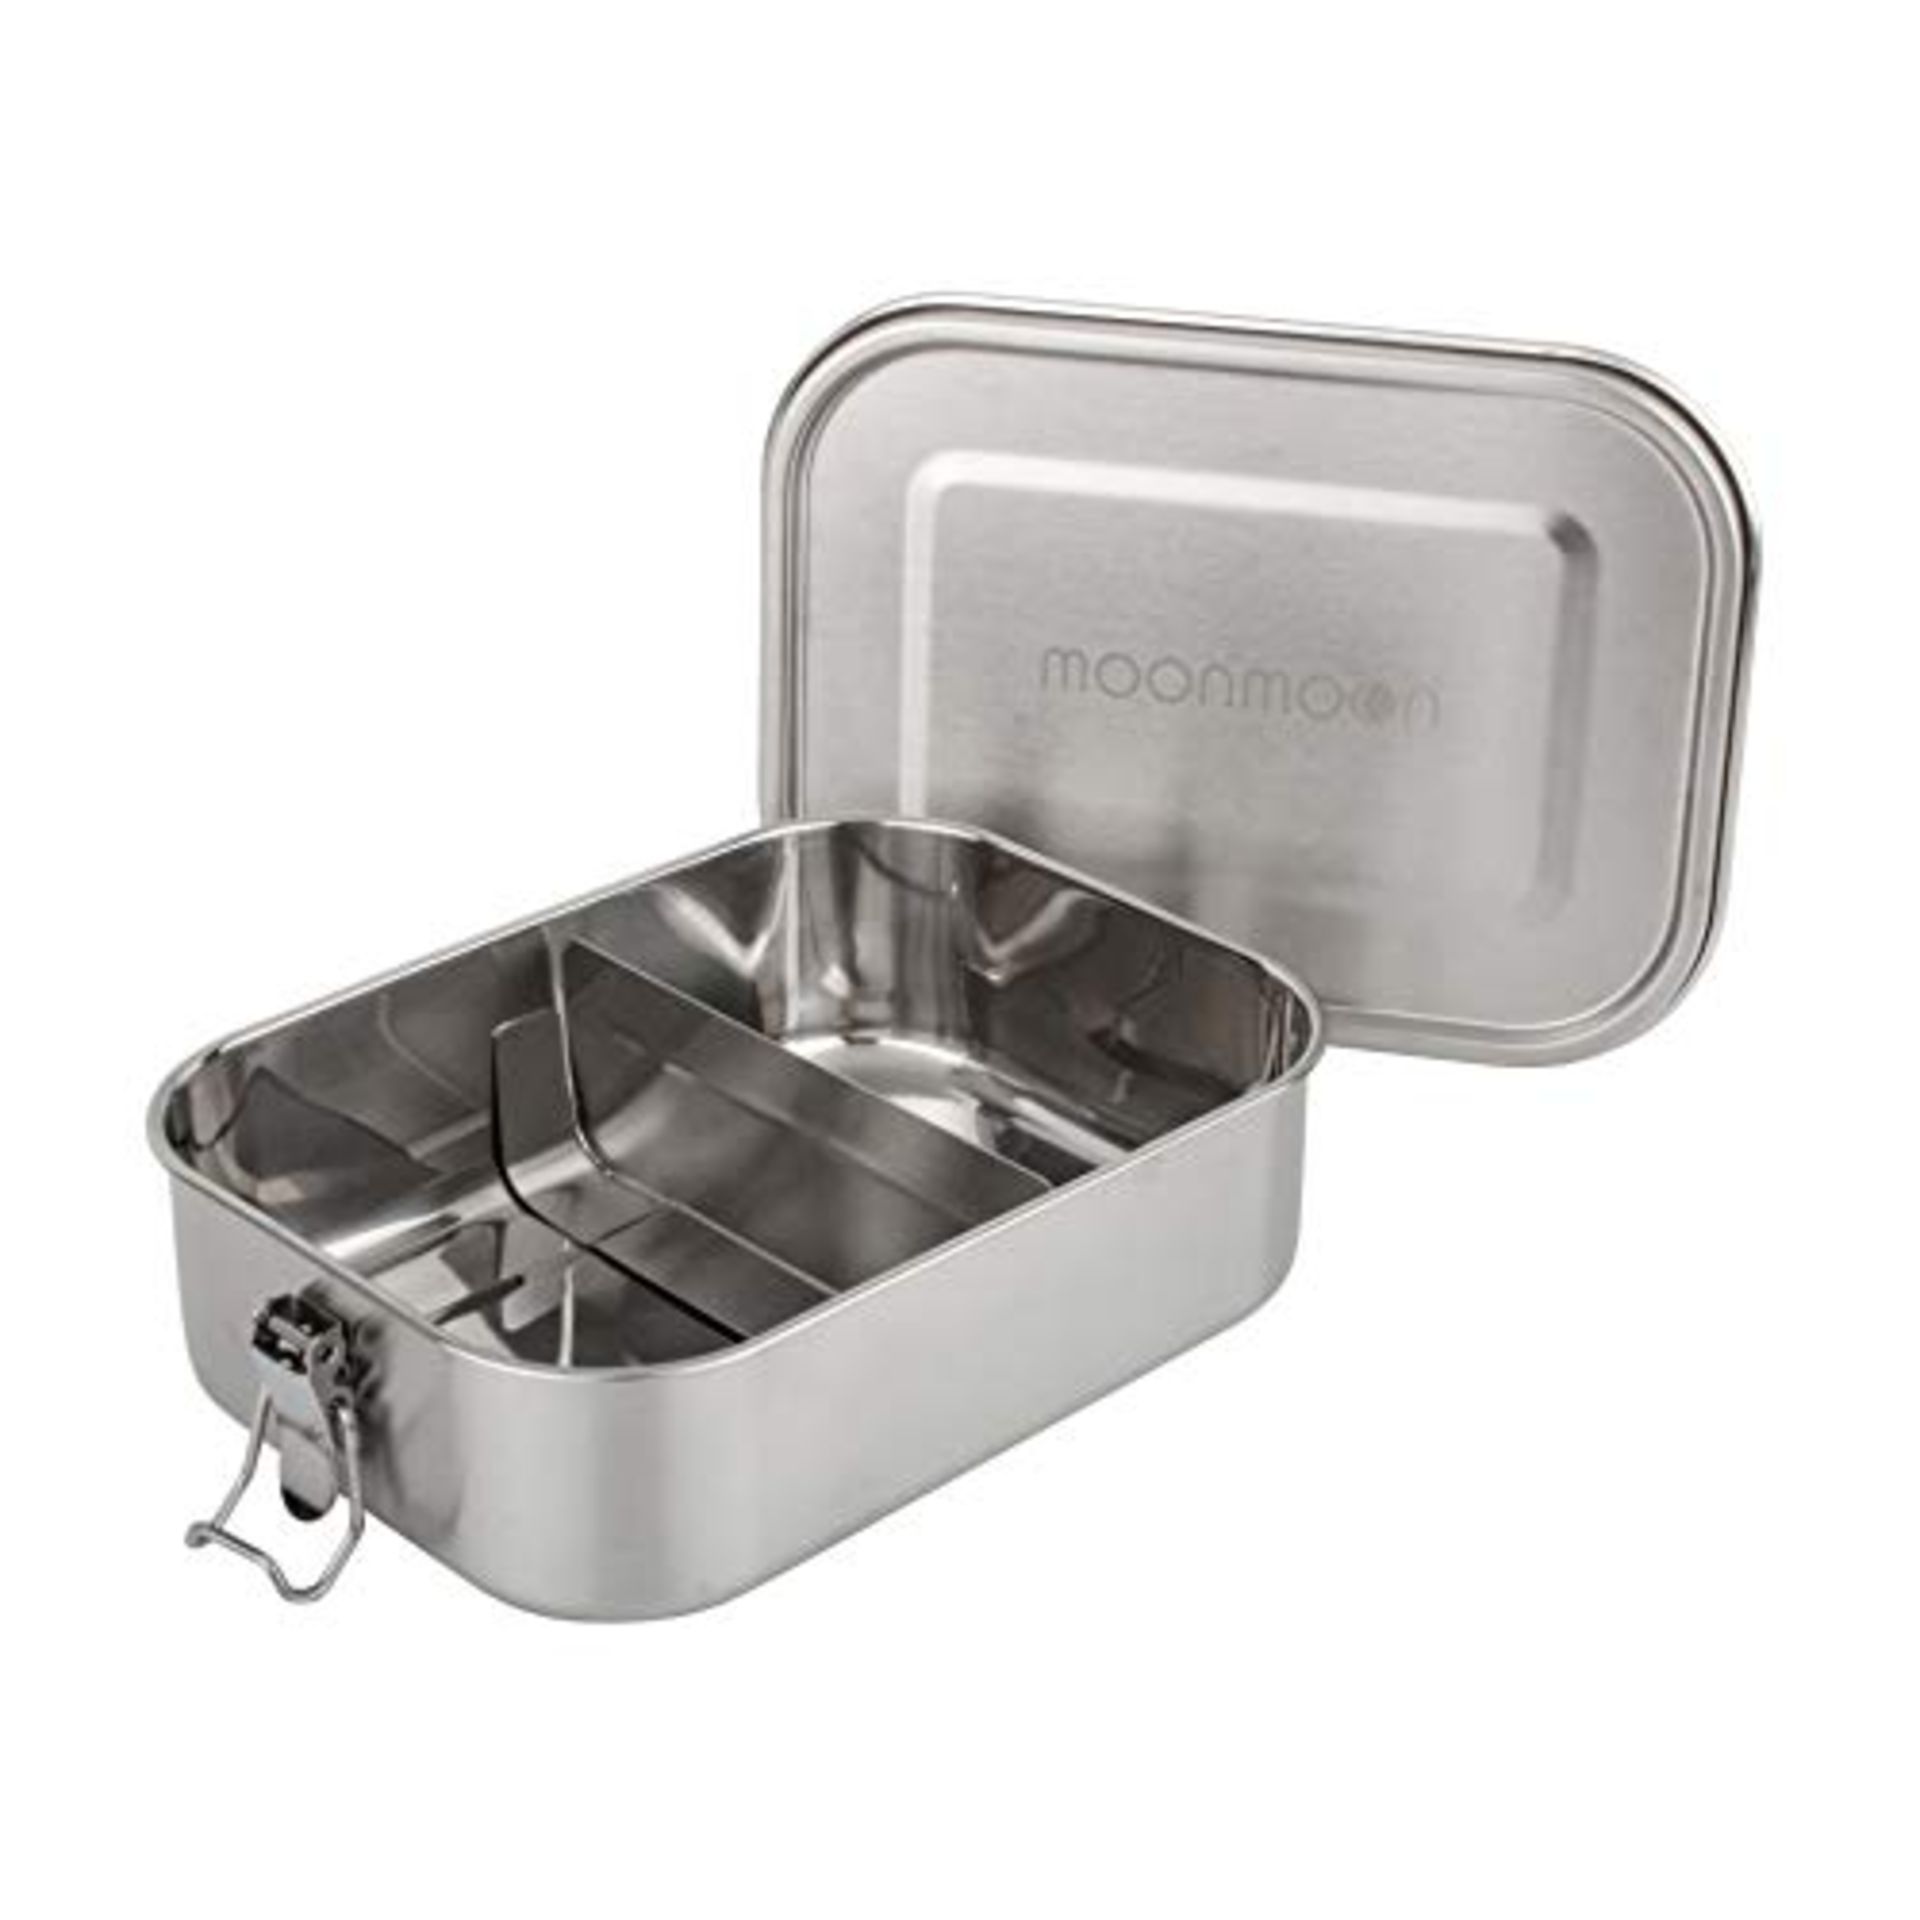 Moonmoon Stainless Steel Lunch Box | Eco-Friendly 1.2 Litre Leakproof Bento Box with c - Image 7 of 12